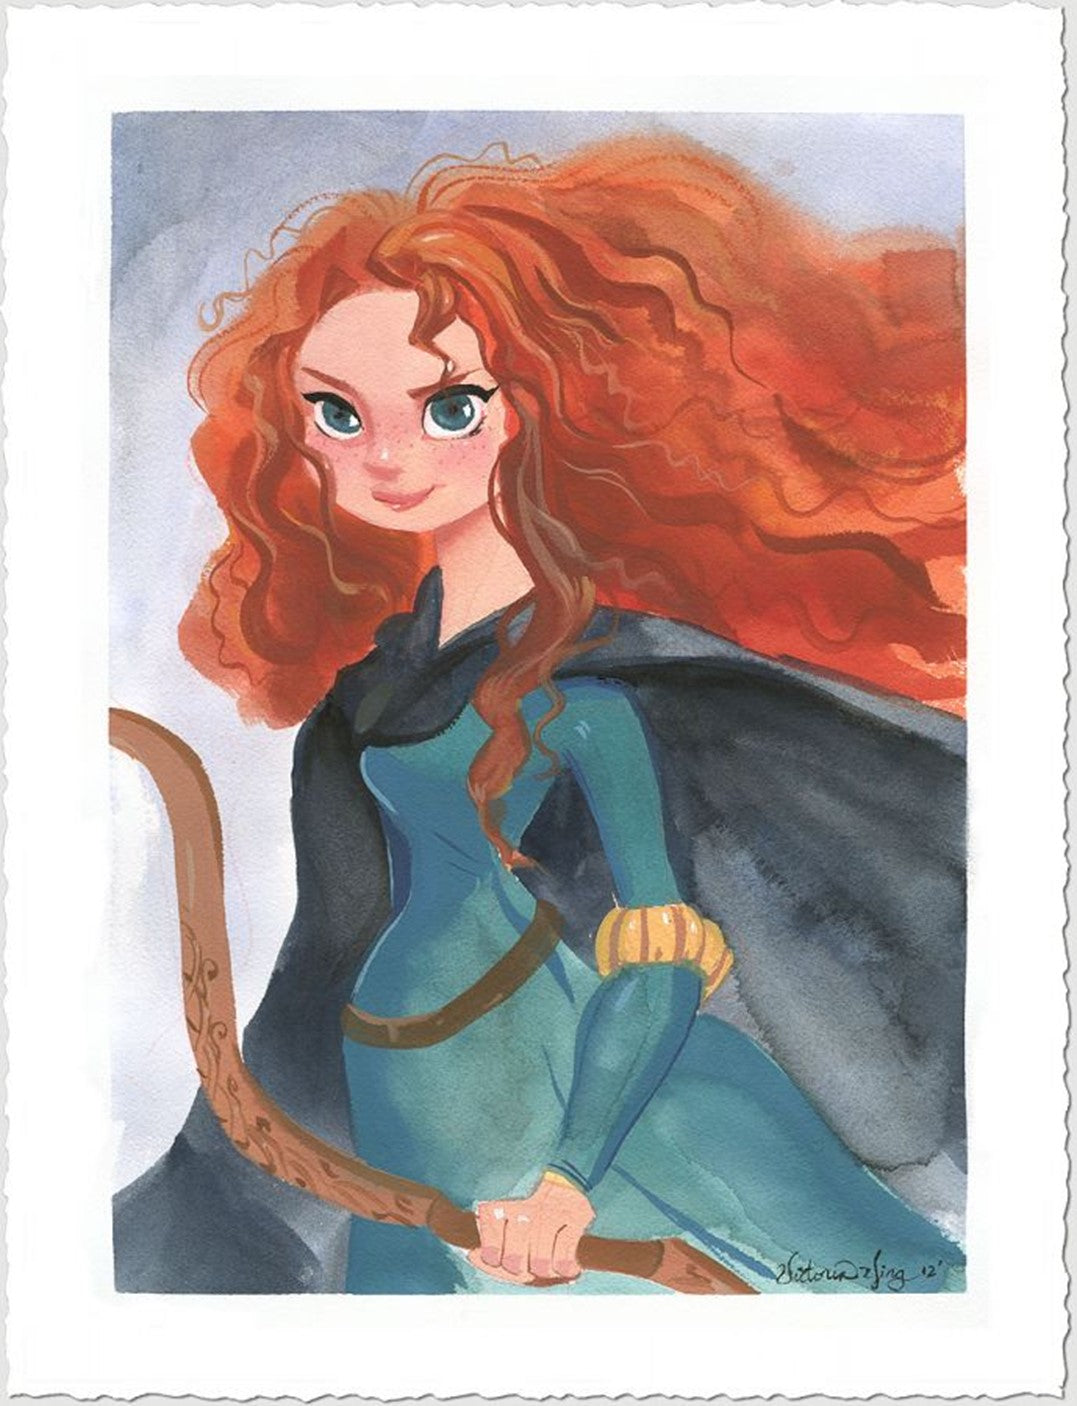 Merida by Victoria Ying, inspired by Brave